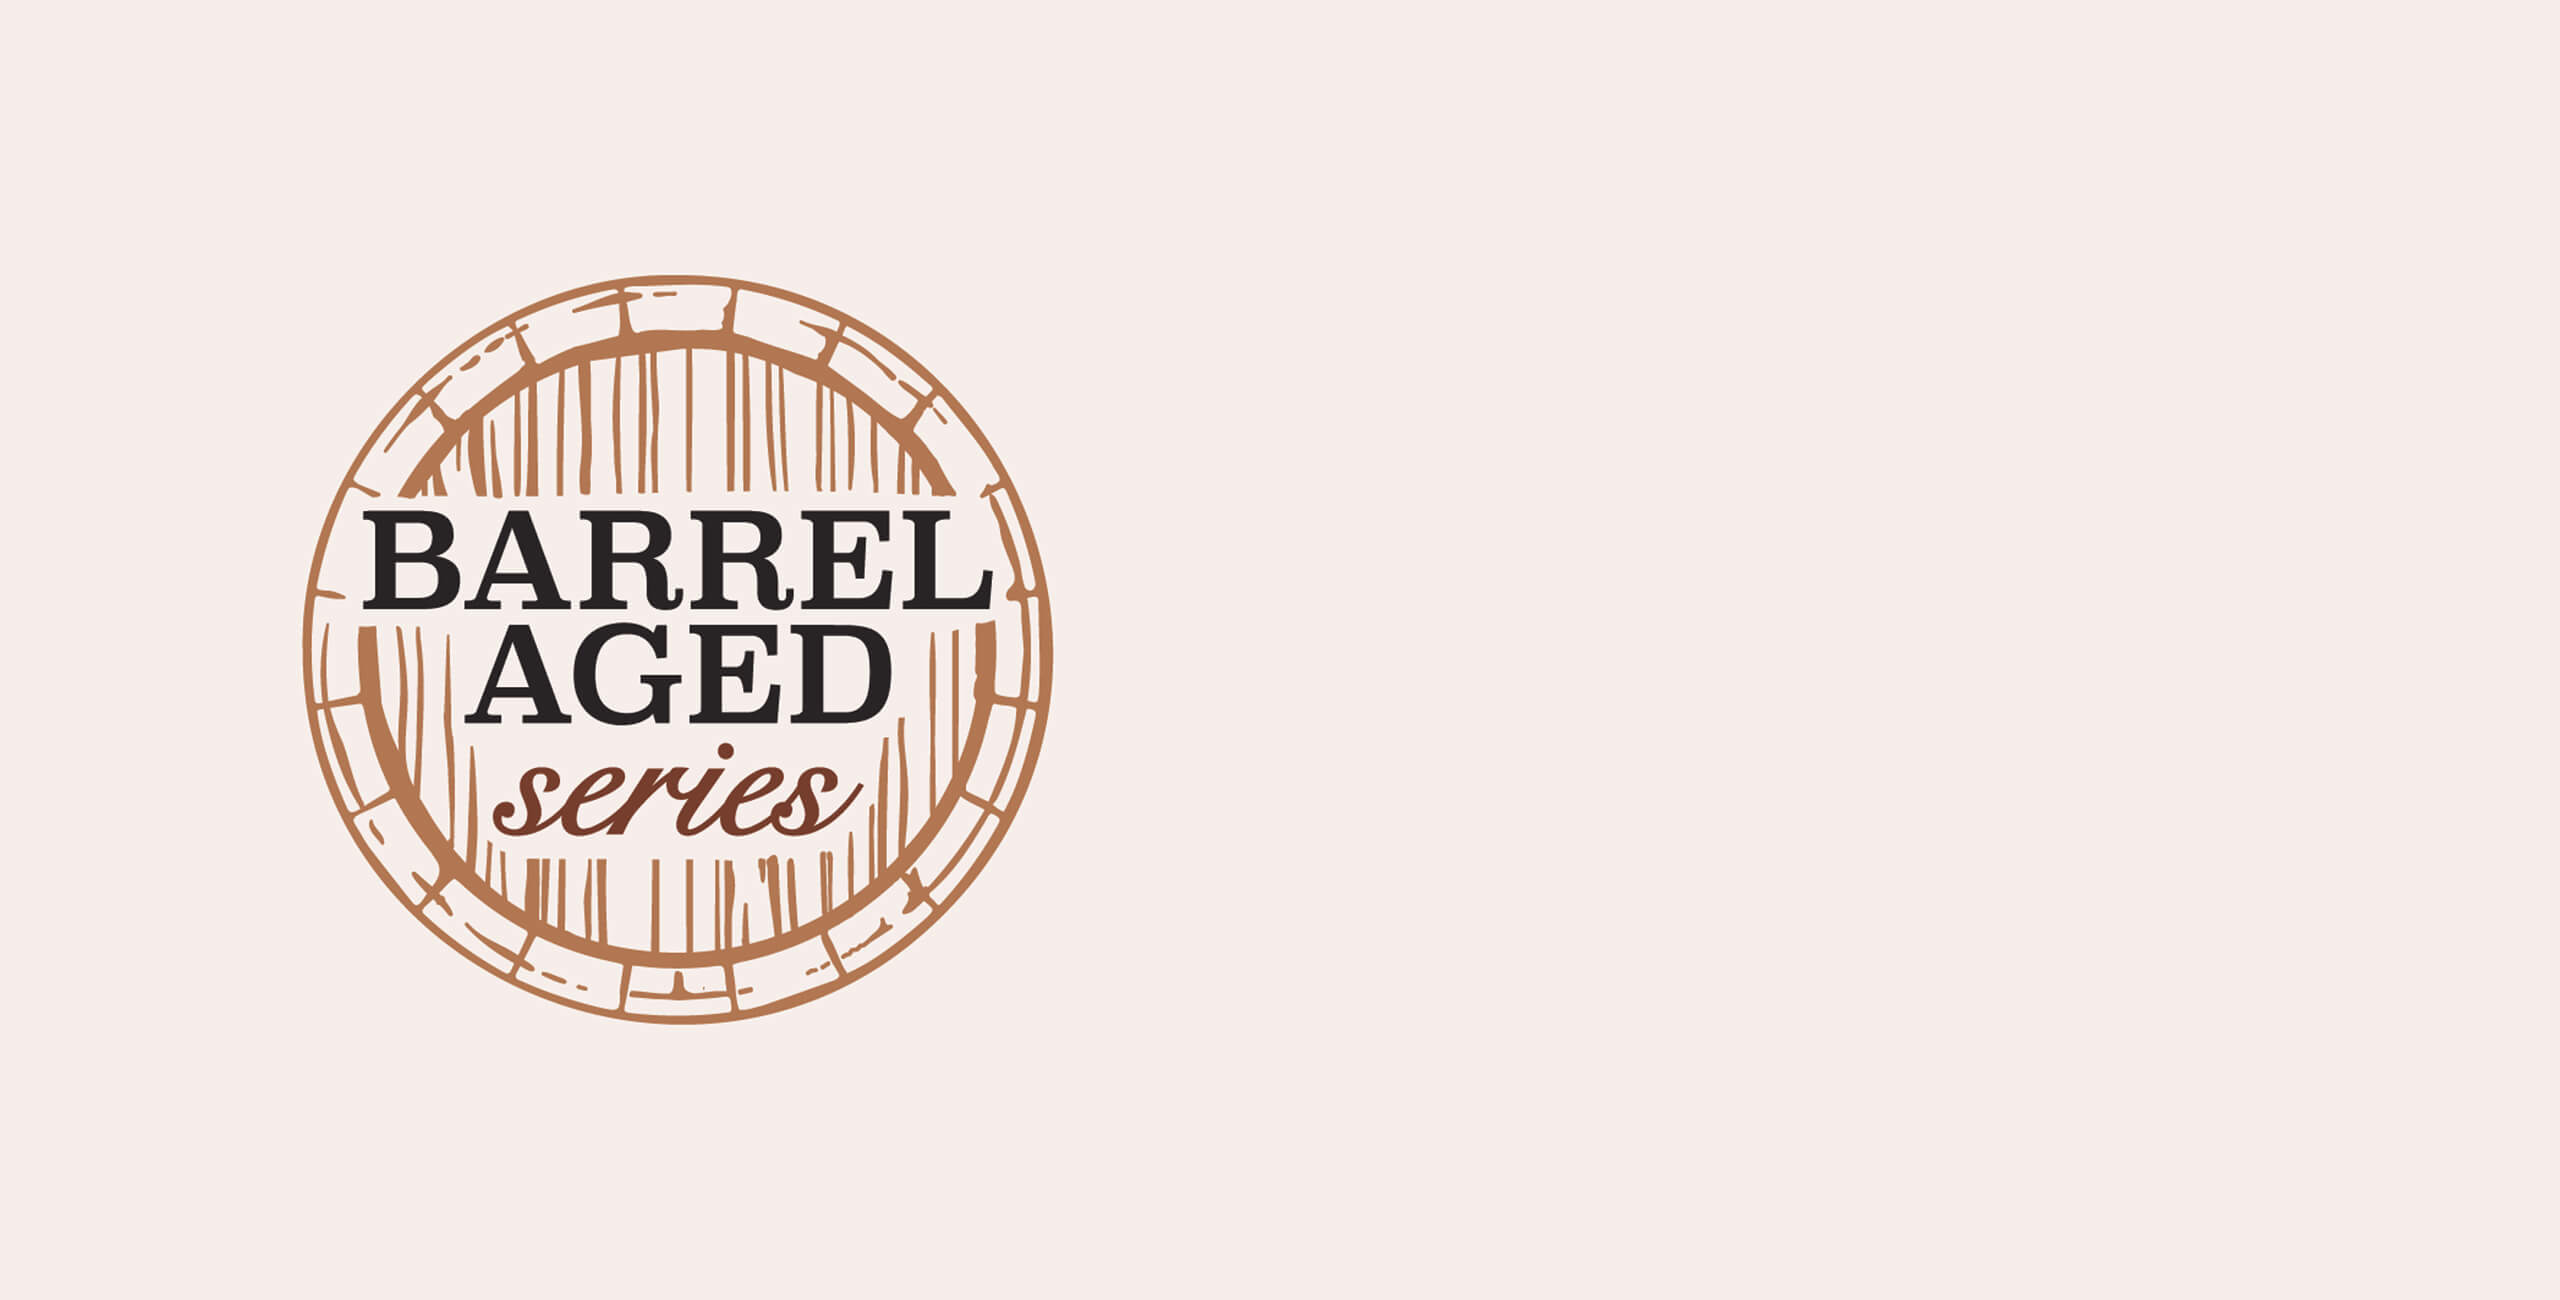 Barrel-Aged series background with logo